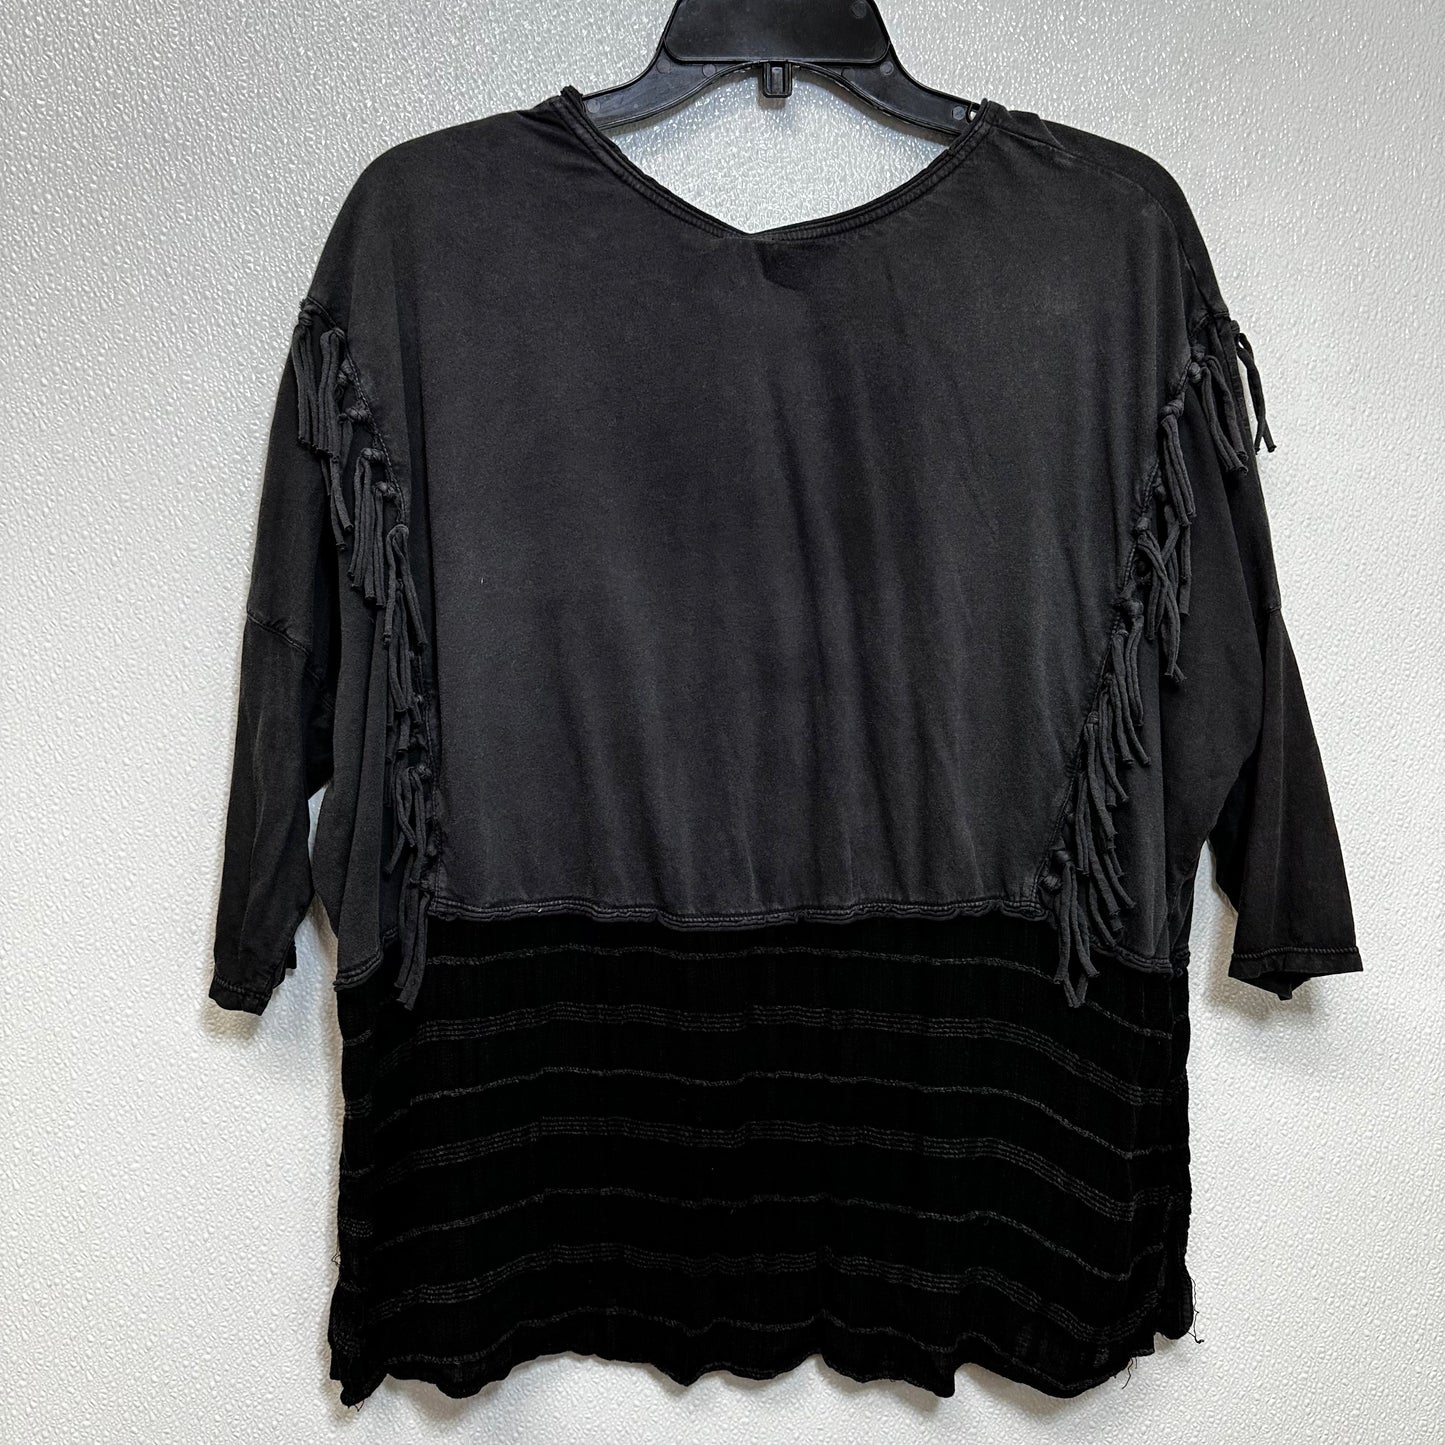 Grey Top 3/4 Sleeve Free People, Size M